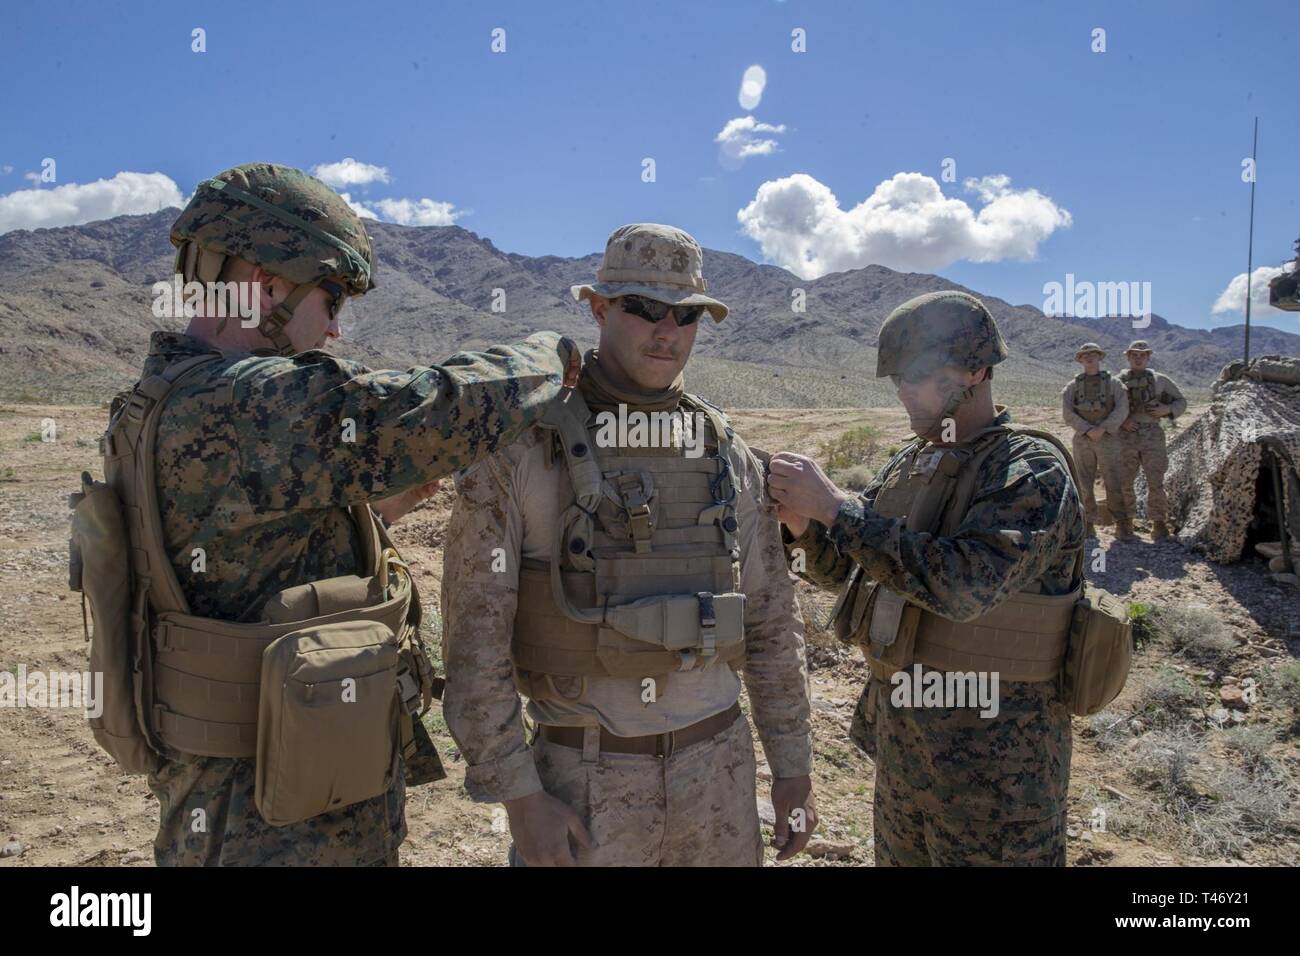 U.S. Marine Maj. Gen. David J. Furness, left, the commanding general, and Sgt. Maj. Alex M. Dobson, the sergeant major, 2nd Marine Division meritoriously promote Lance Cpl. Patrick C. Mulcahy, a section leader with 2nd Light Armored Reconnaissance Battalion, 2nd Marine Division to the rank of Corporal, at Fort Irwin, California, March 12, 2019. Mulcahy was recognized by Maj. Gen. Furness for his superior performance of duties and meritoriously promoted to the rank of Corporal. The Marines of 2d Light Armored Reconnaissance Battalion participated in National Training Center 19-05 as the opposin Stock Photo